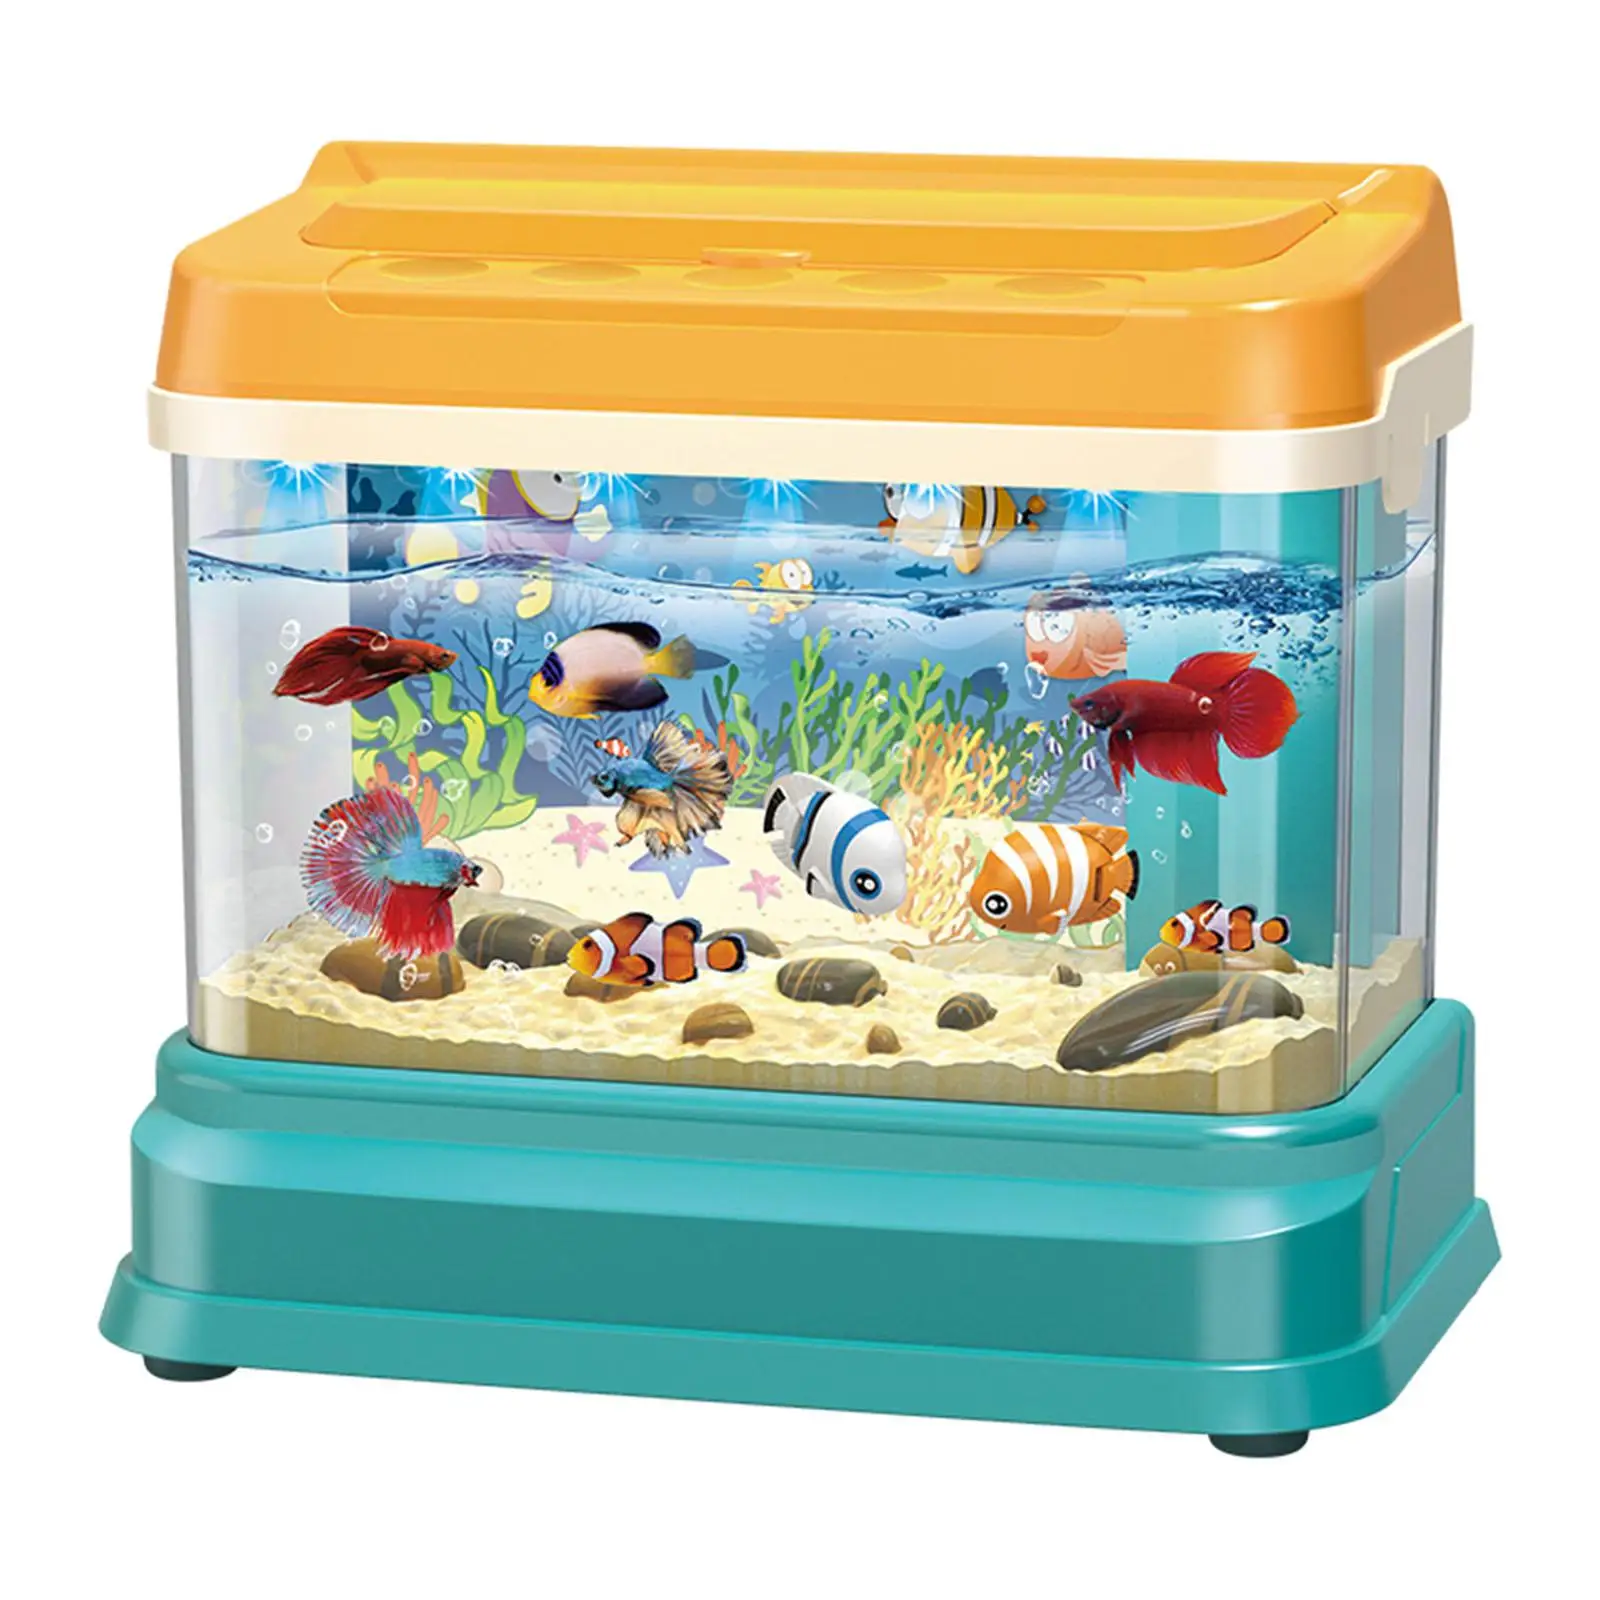 Artificial Fish Tank with Moving Fish Educational for Kids Children